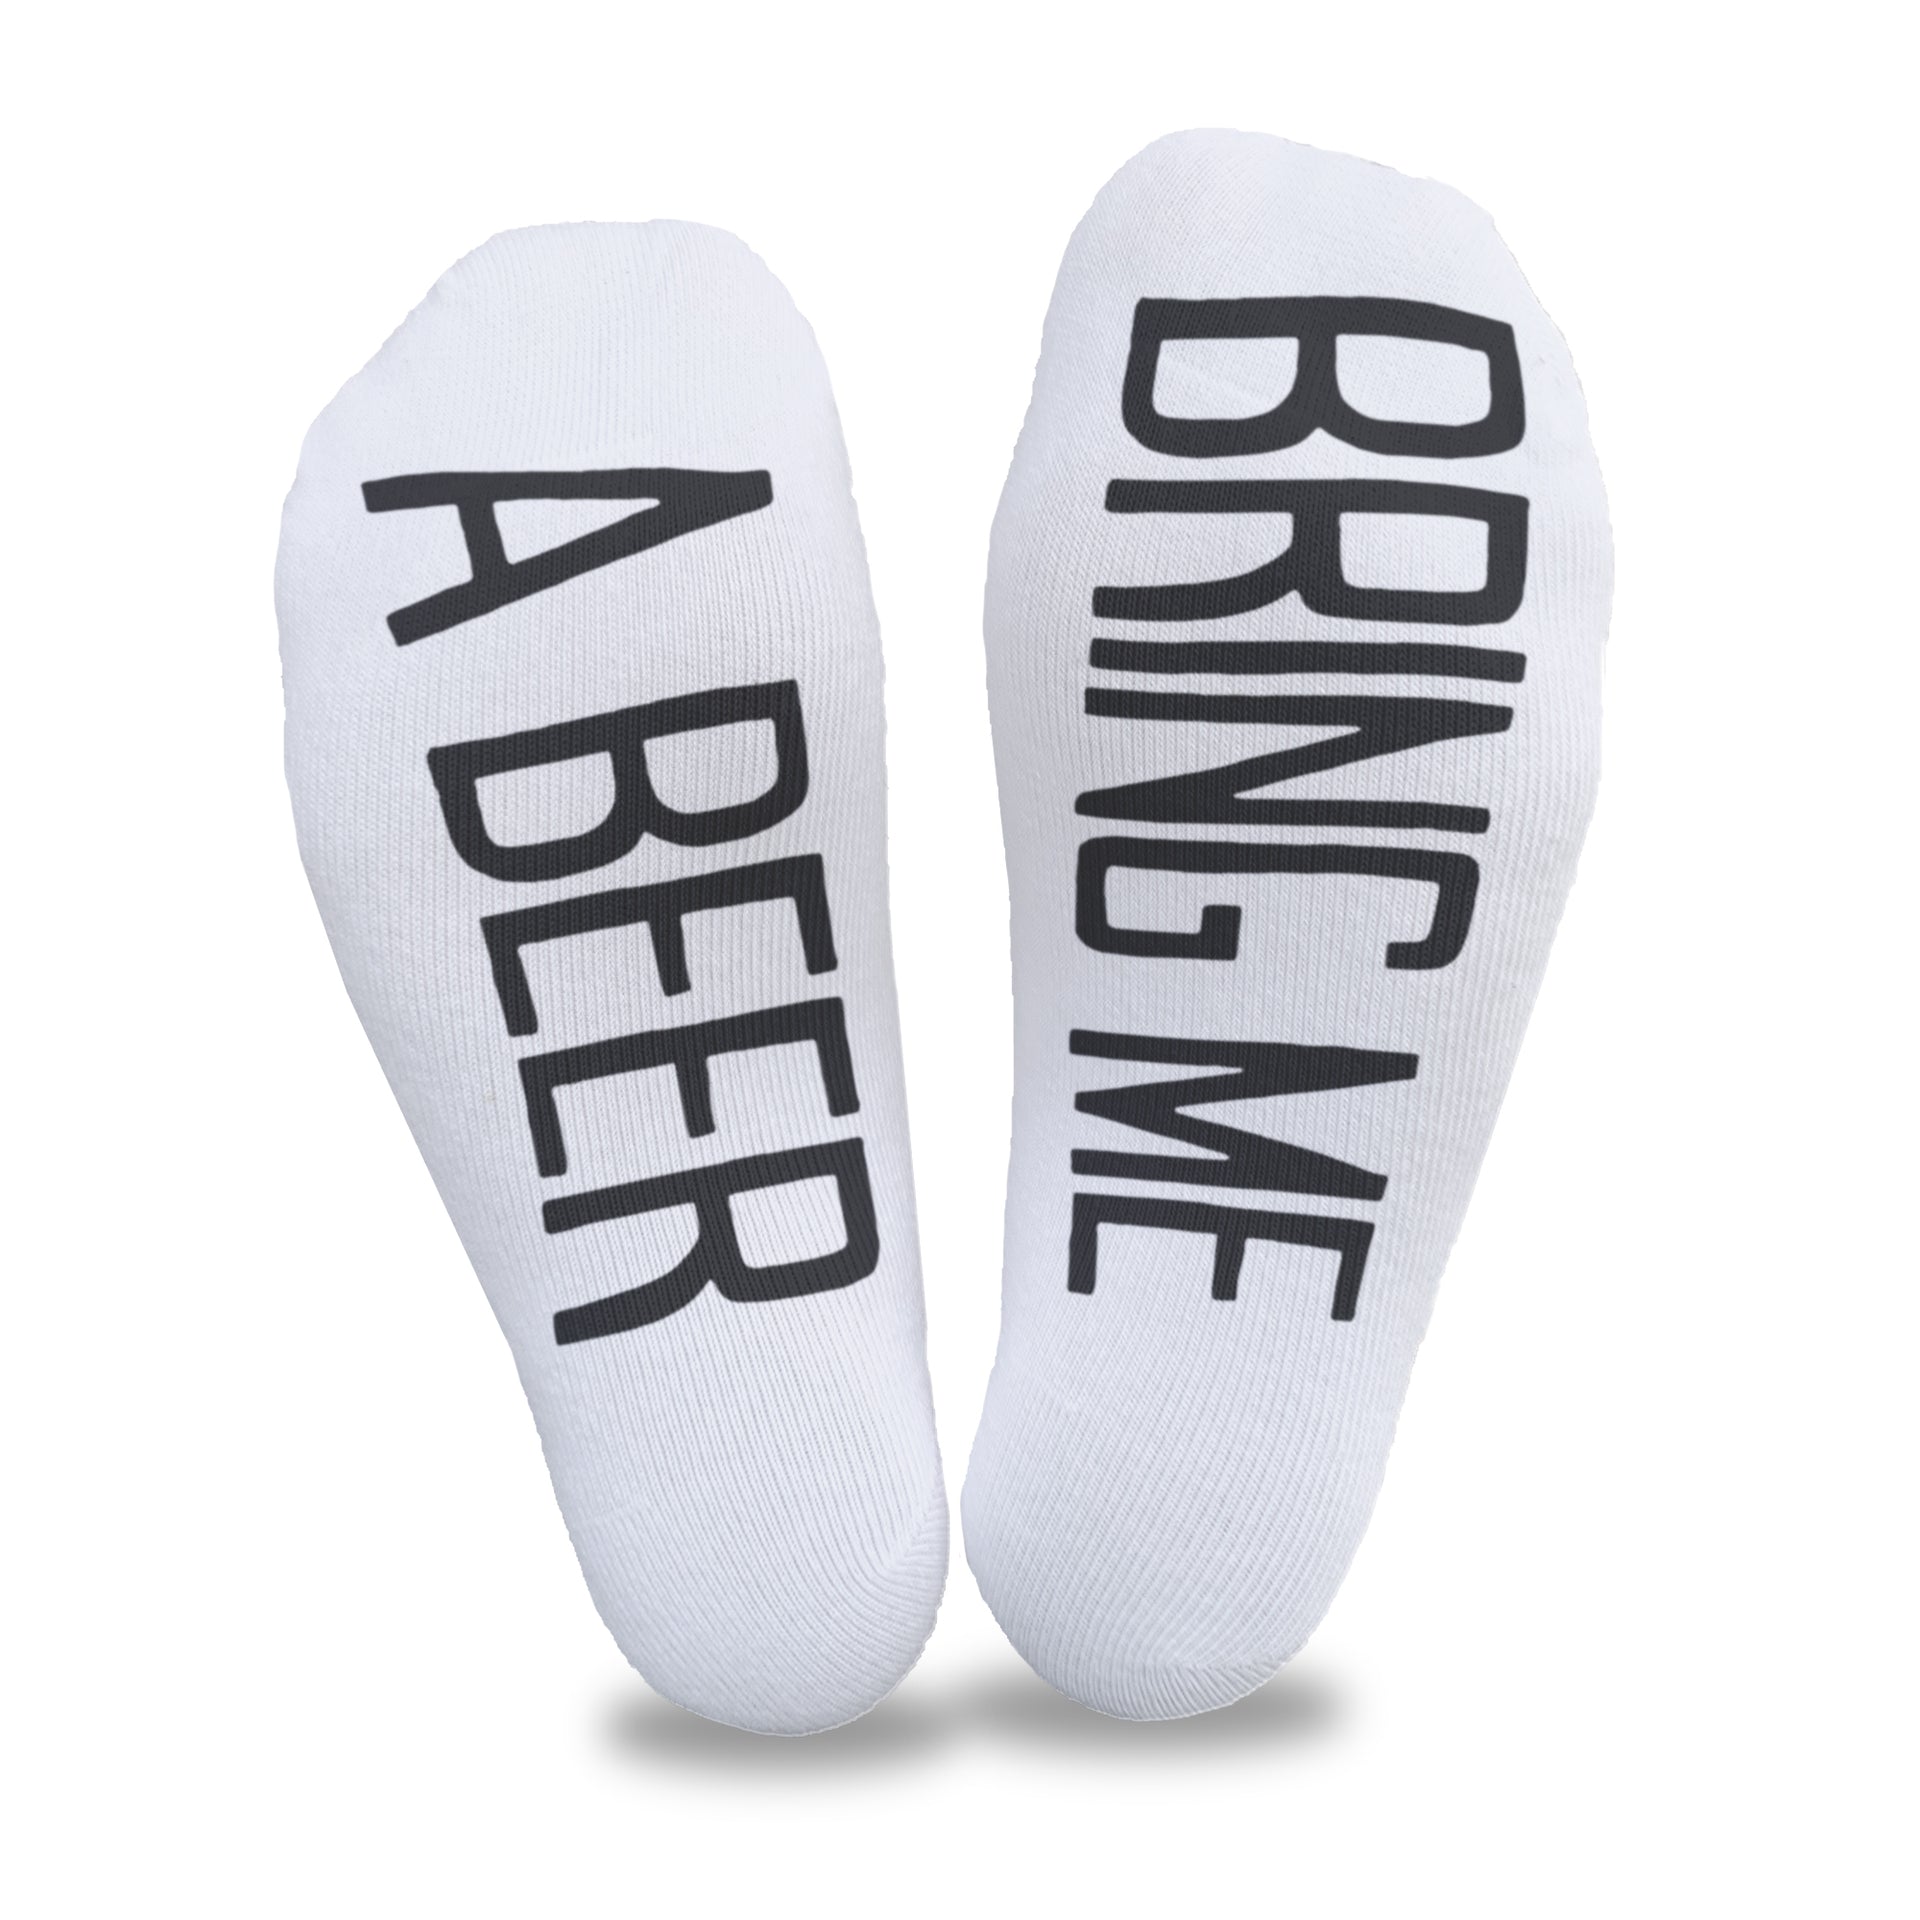 Bring me a beer digitally printed in black ink on the soles of white cotton no show socks makes a great gift for your spouse.